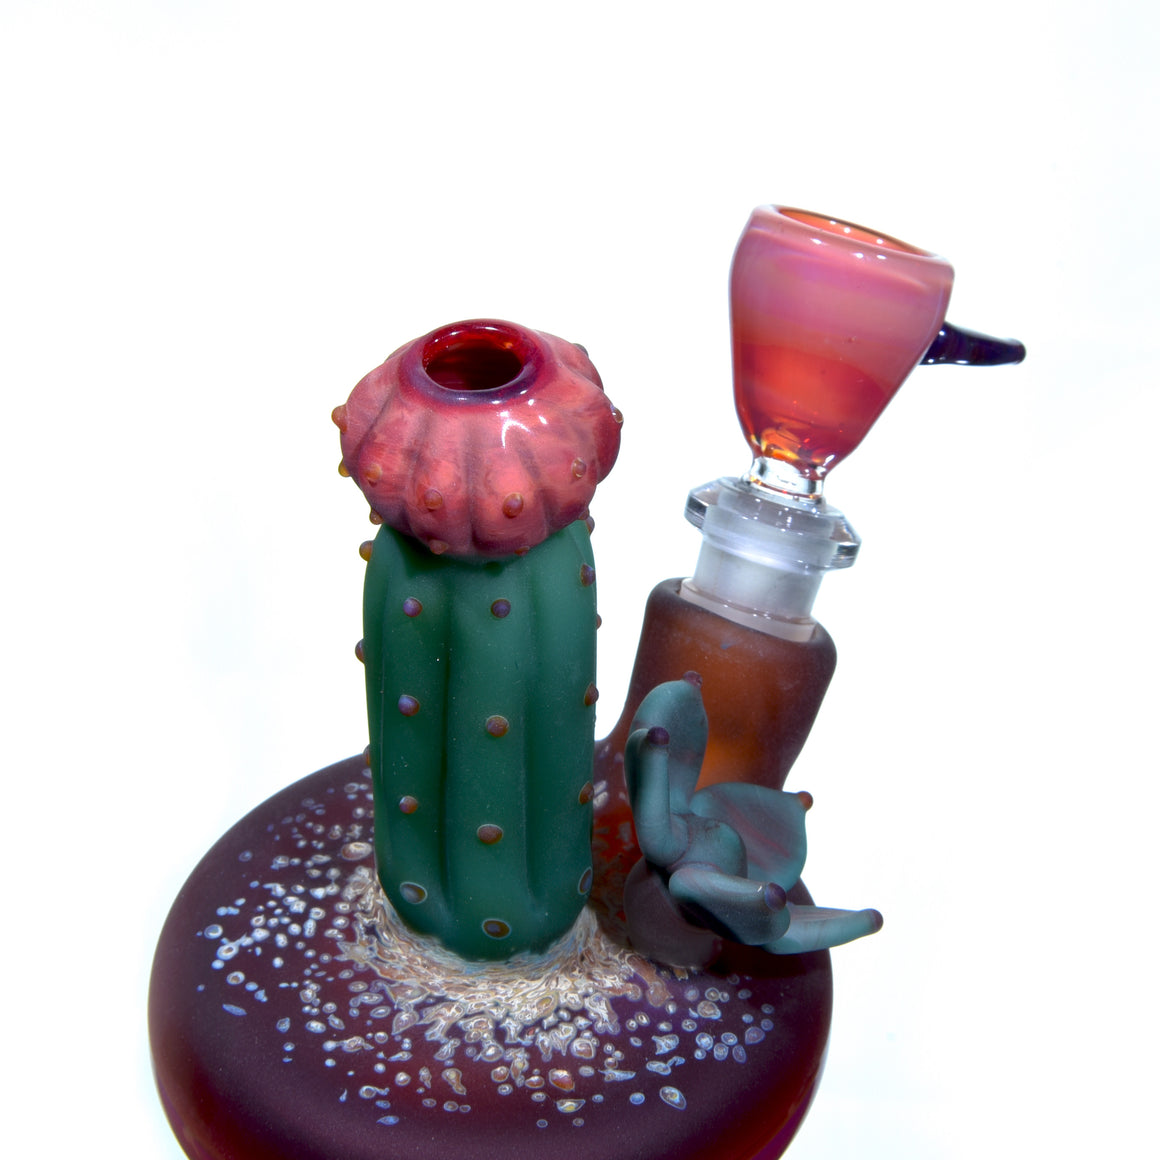 Frosted Floral Pattern Vase Mini Tube w/ Removable Downstem - Echeveria & Moon Cactus - 10mm Female